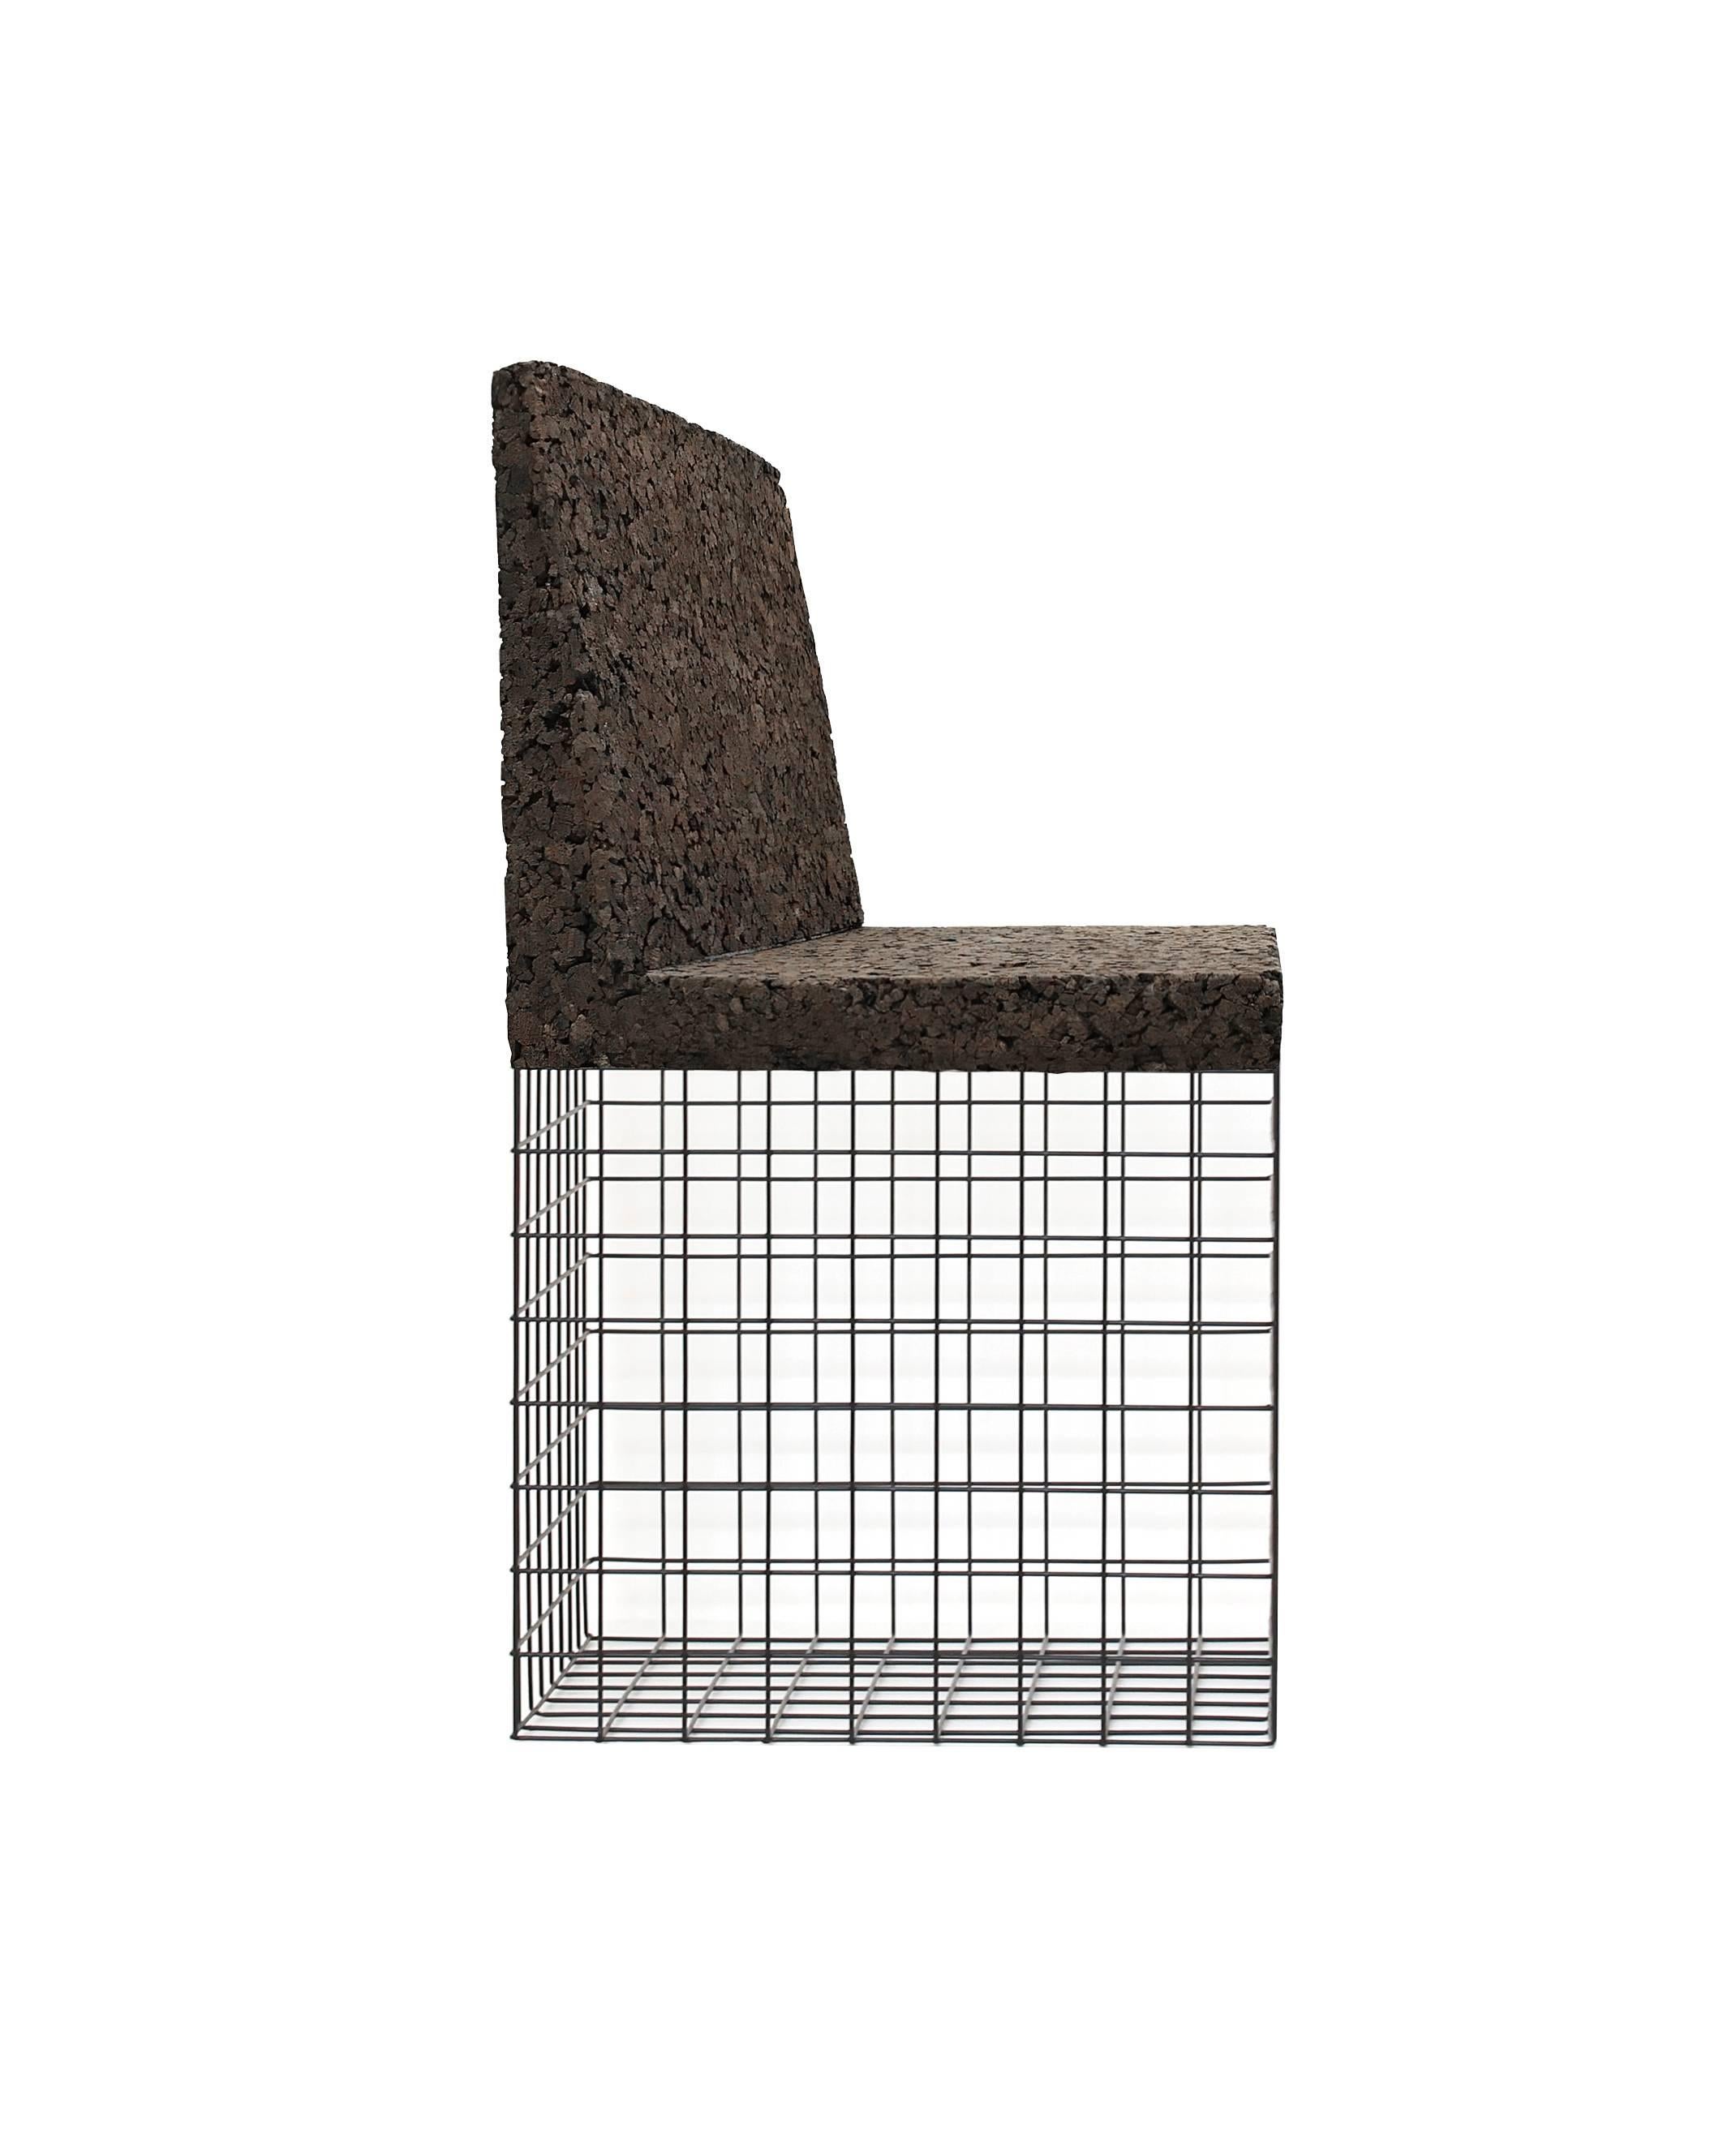 Toasted Cork and Metal chair, contemporary and artsy by Awarded designer Gustavo Martini.

